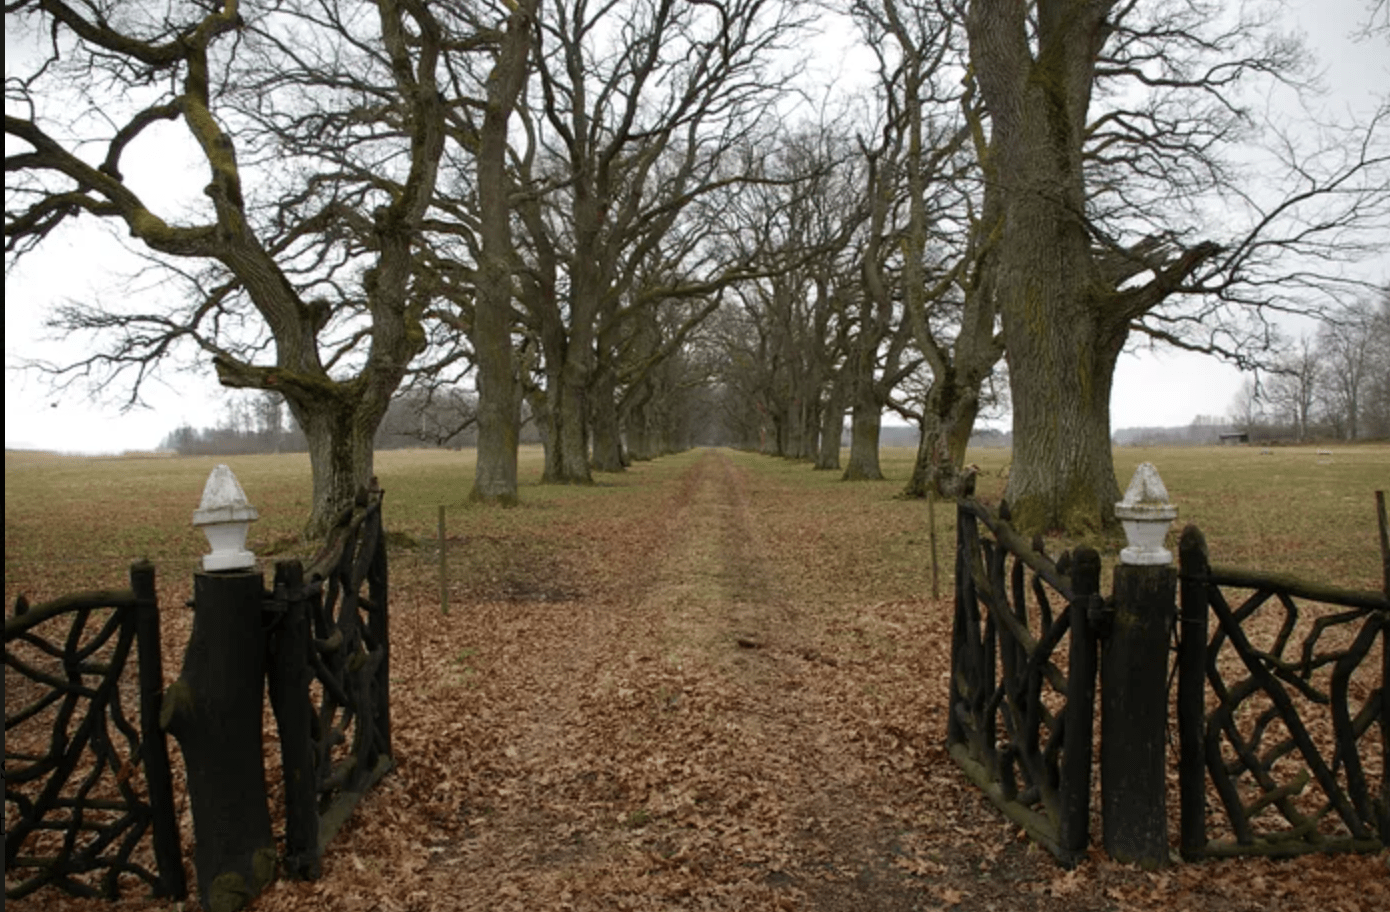 rustic criss cross wooden gate out in country tree lined road covered with leaves